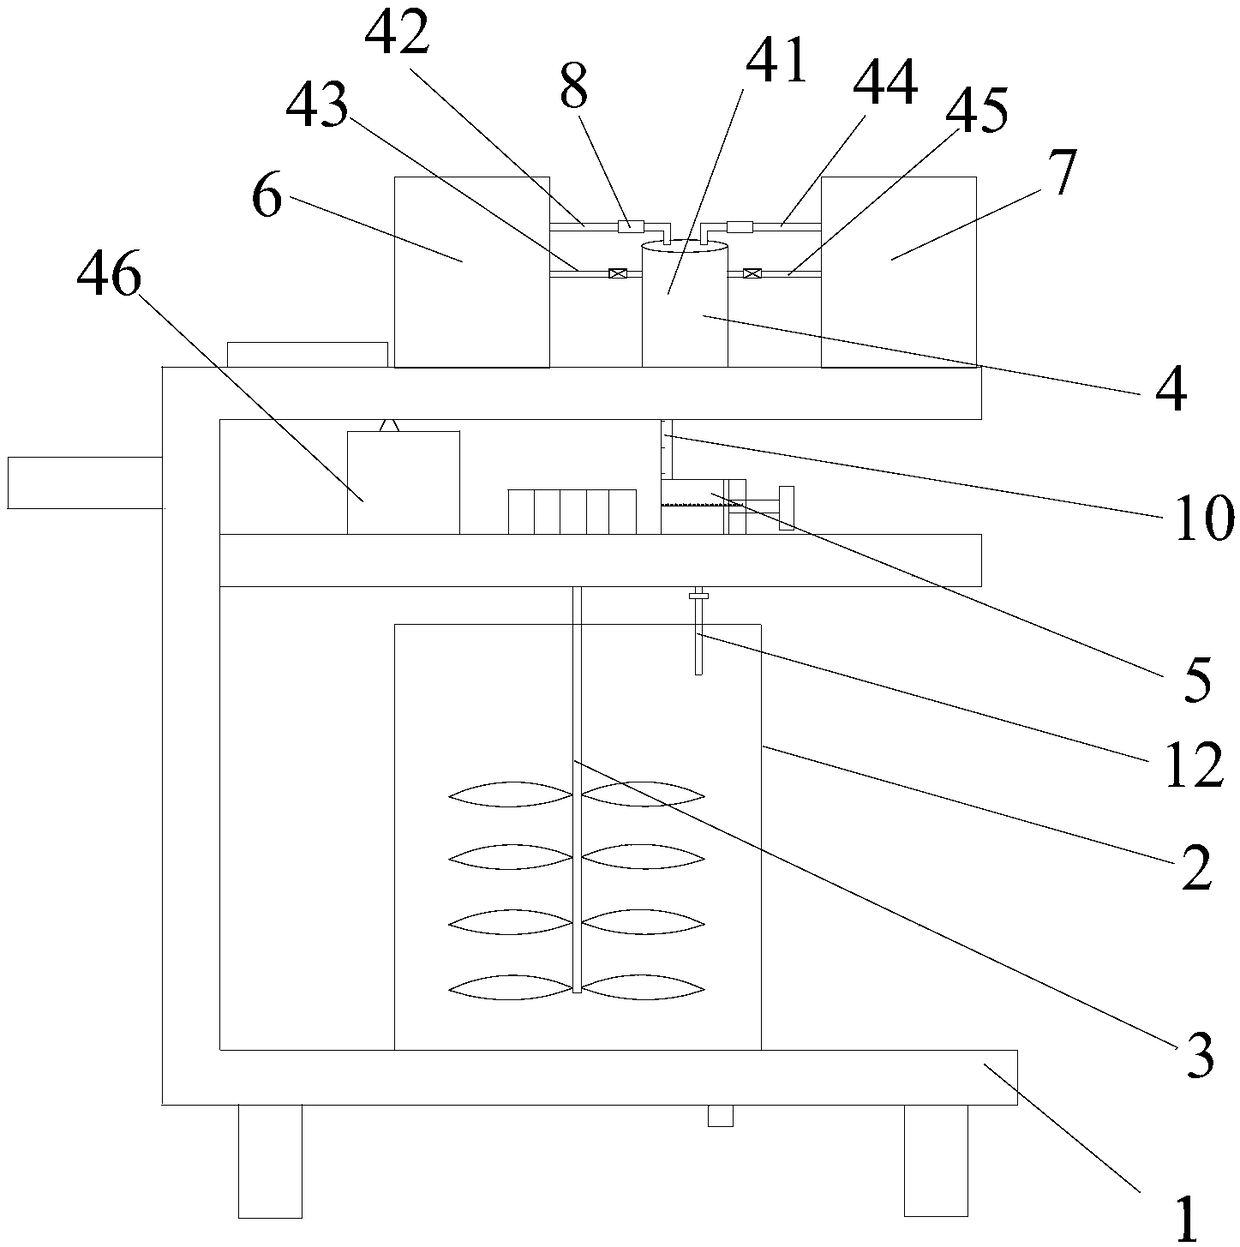 Apparatus for preparing disinfectant solution for animal husbandry